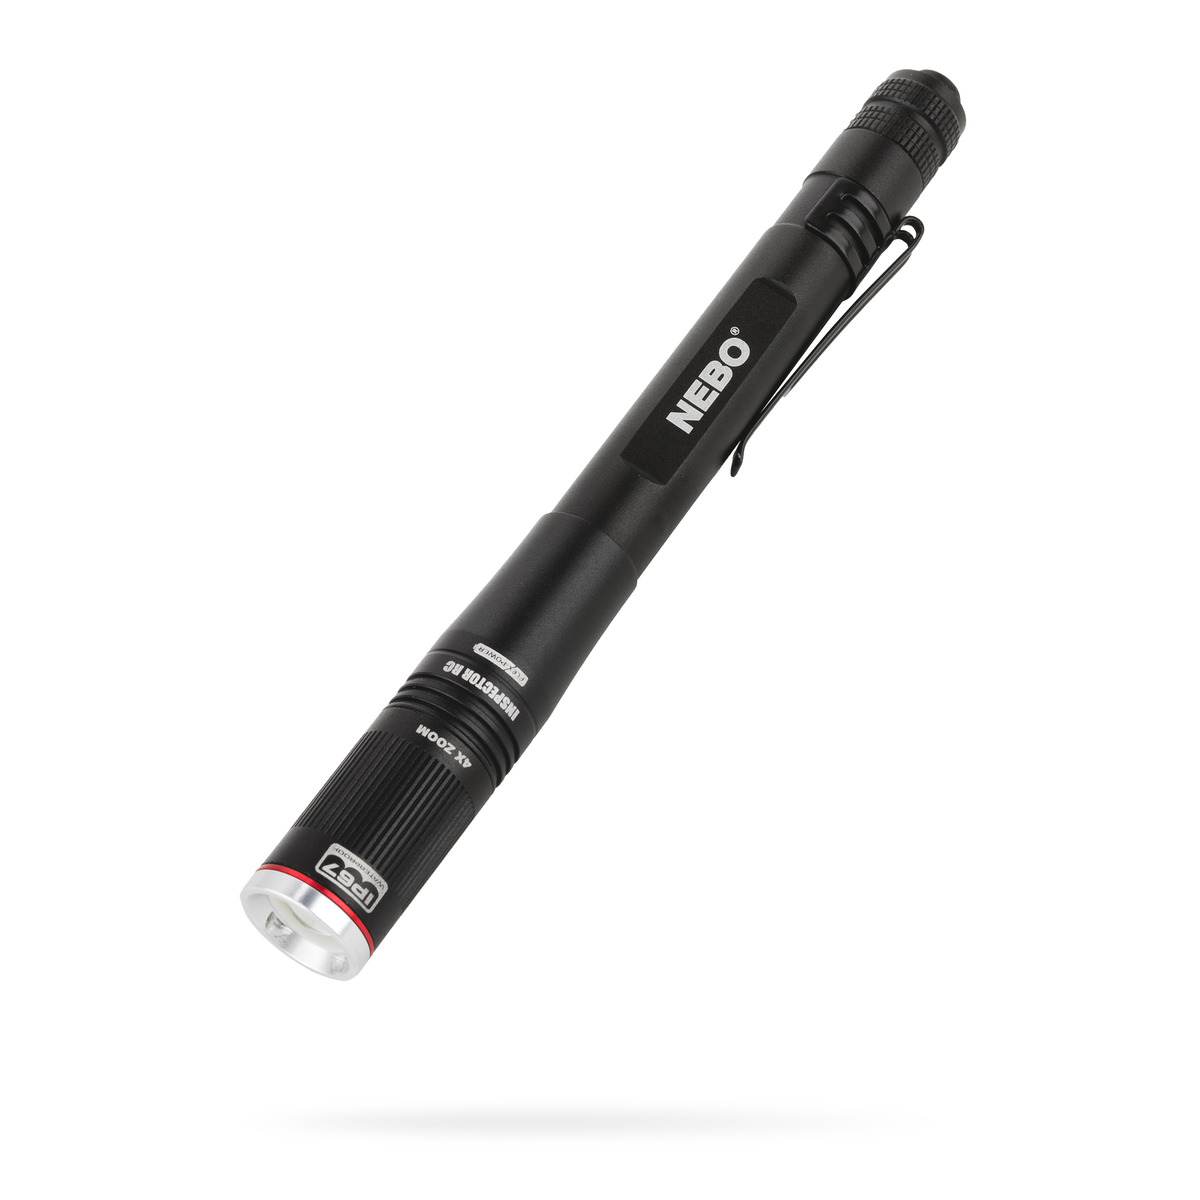 Image of the NEBO Inspector RC Pen Light.